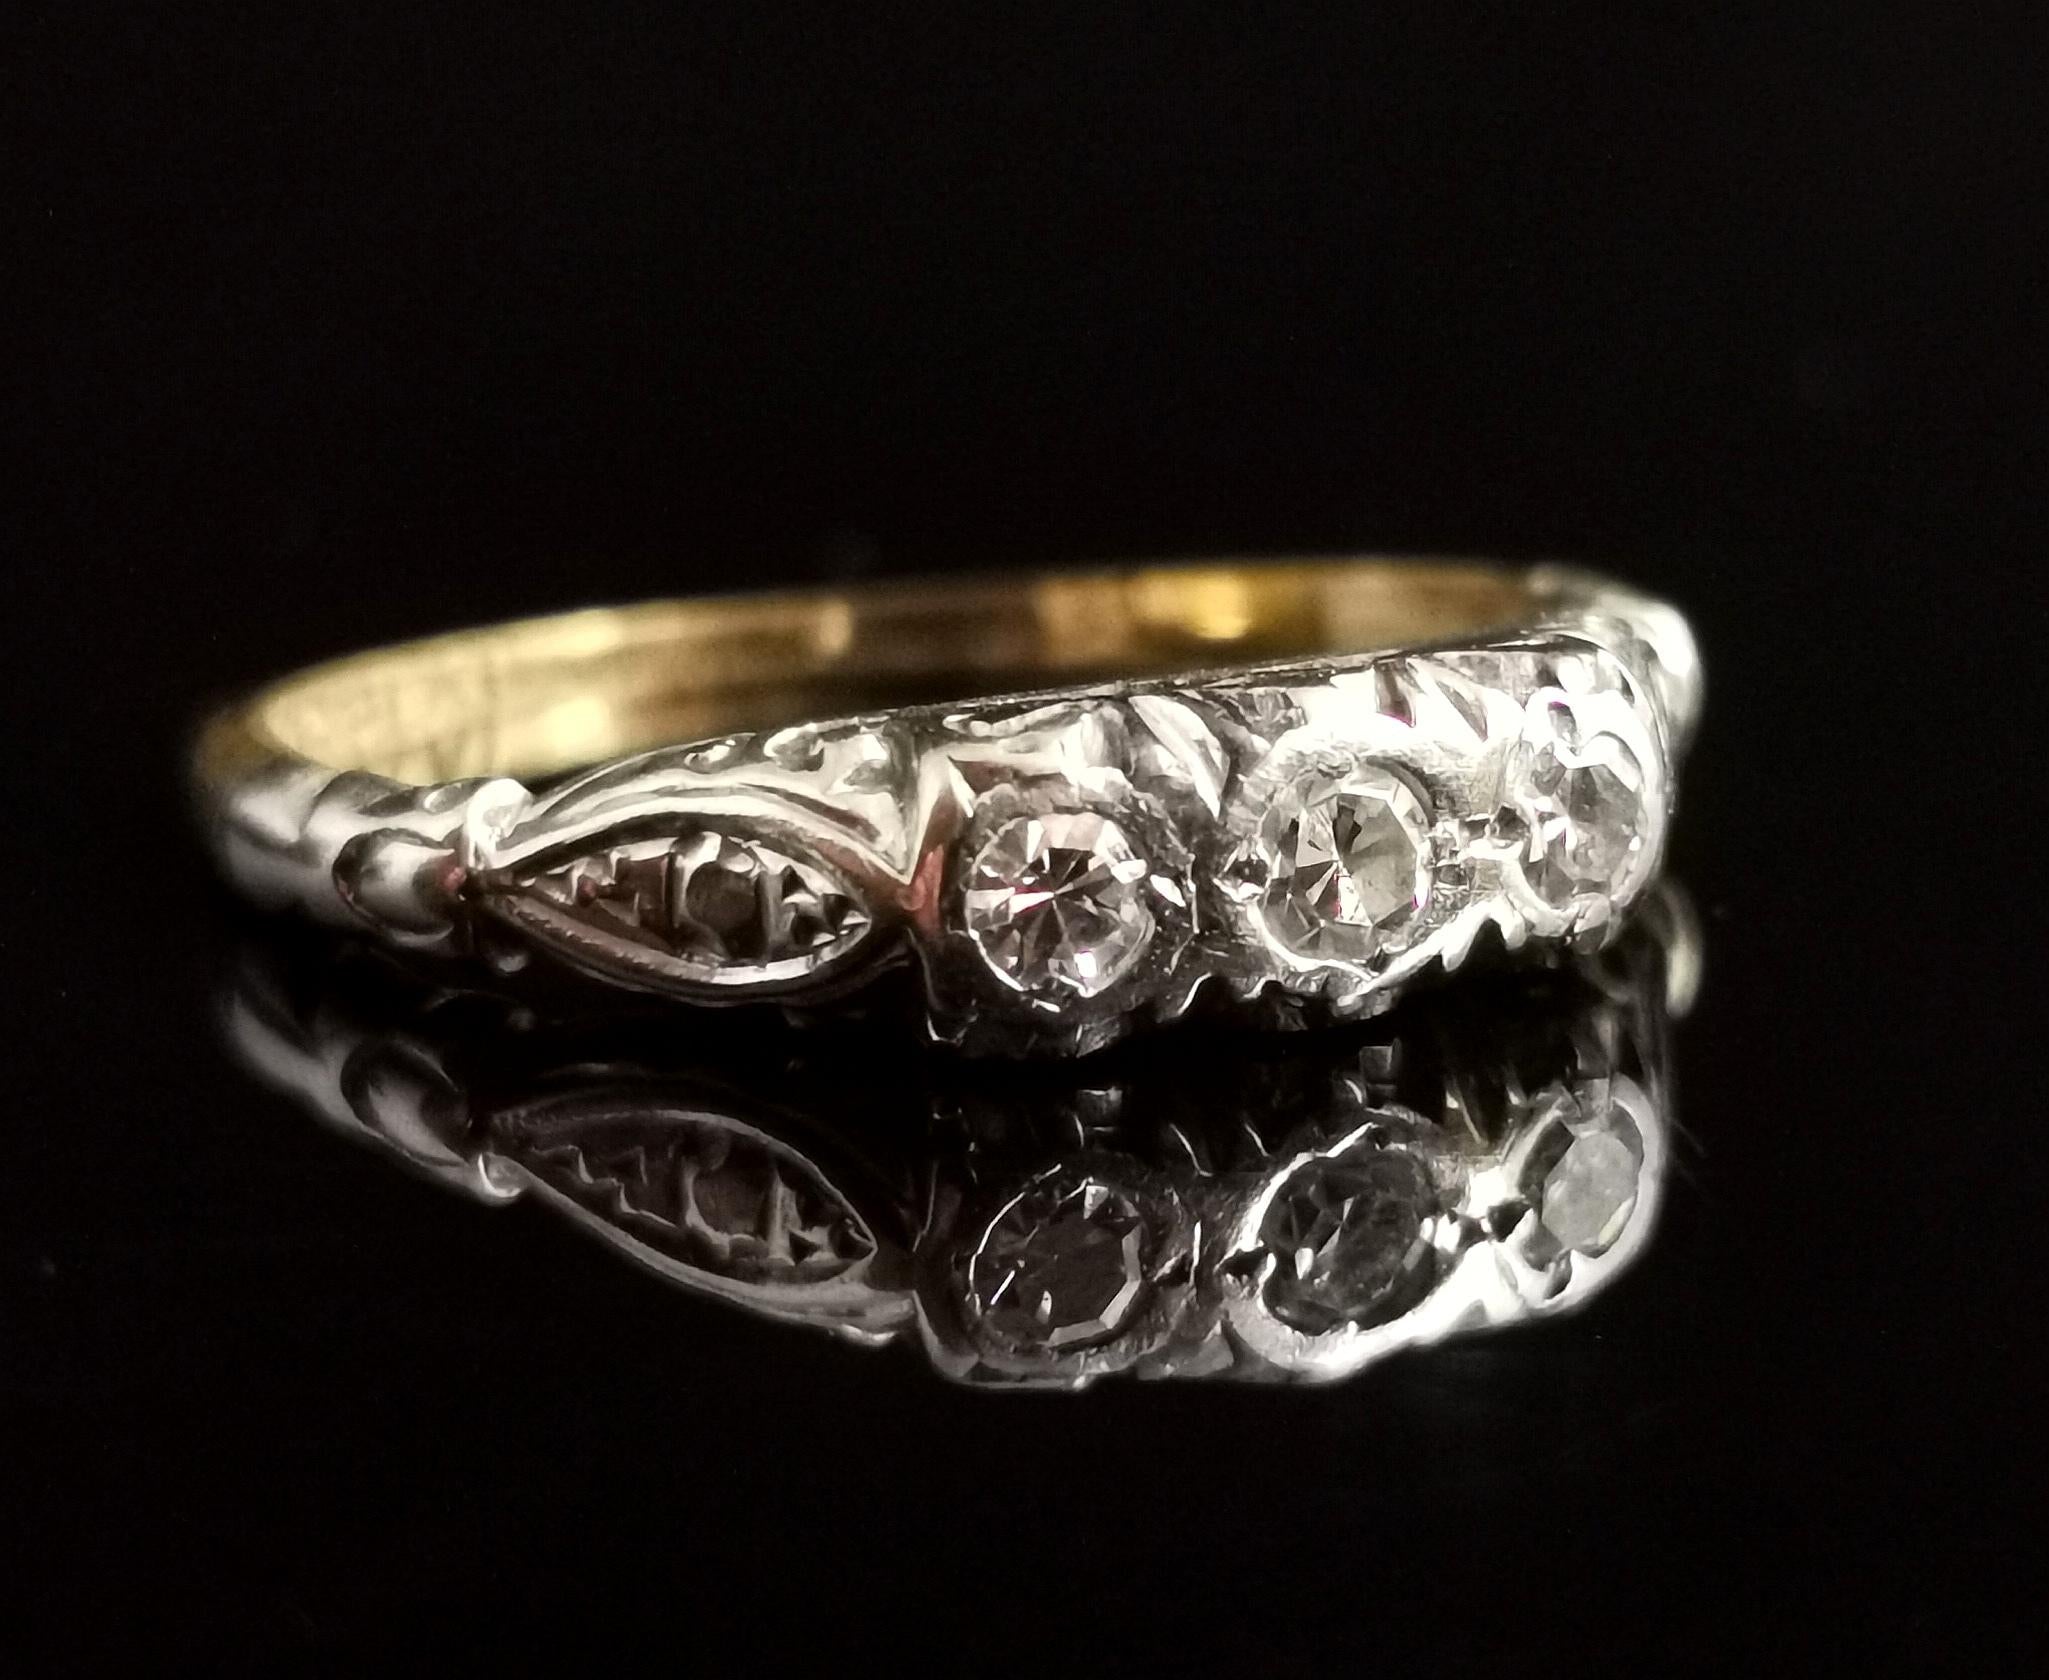 A pretty vintage Art Deco diamond, three stone ring.

A rich 18kt yellow gold band with a row of three sparkling single cut diamonds of approx 0.10 carats set into an illusion setting.

The diamonds are surrounded by the scrolling platinum design